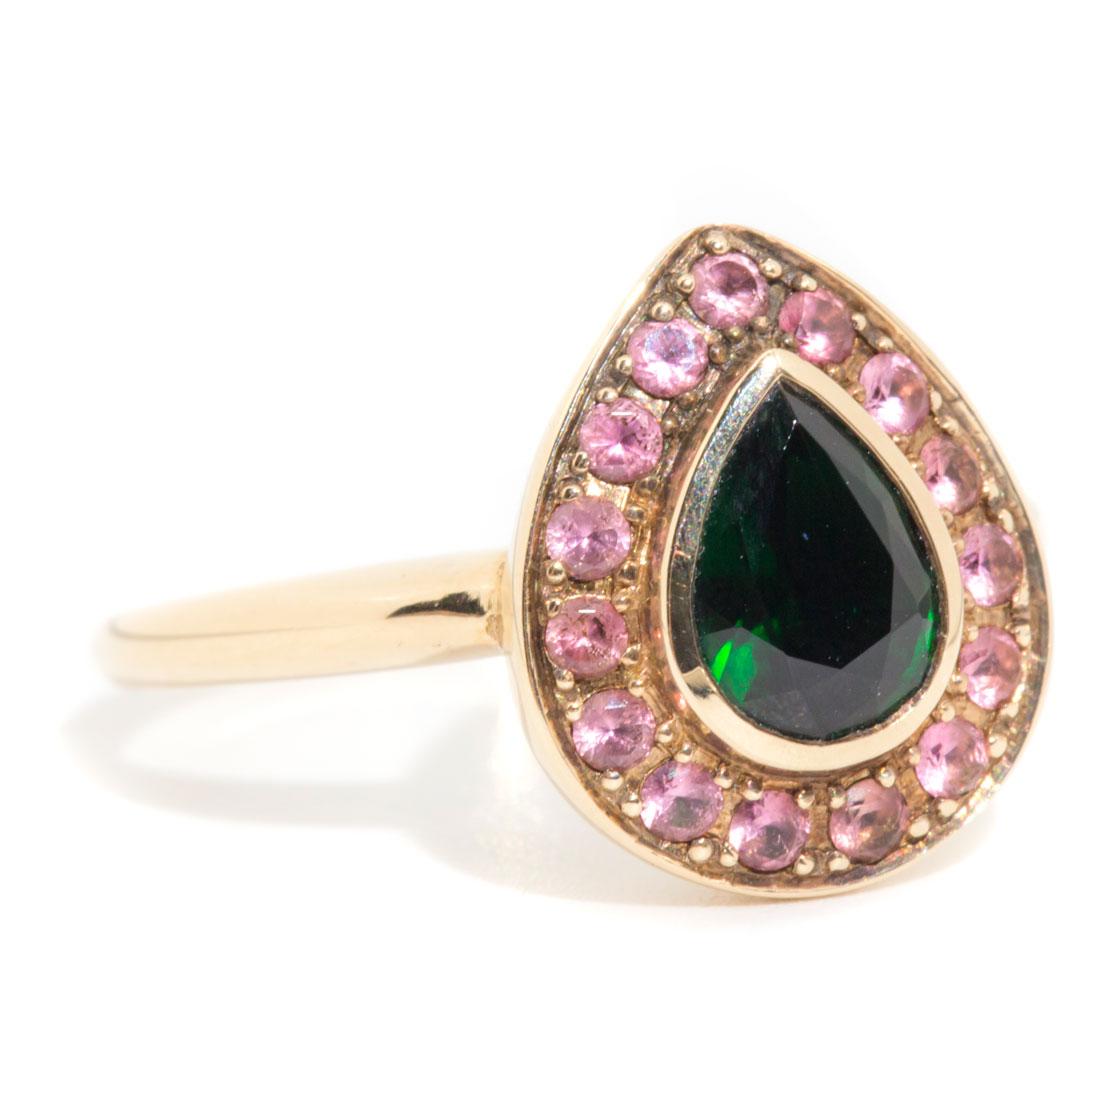 Forged in 9 carat yellow gold, this charming contemporary ring is embellished with an elegant display of green and pink tourmalines, with the central pear-shaped tourmaline exhibiting an alluring deep green hue and the surrounding pink tourmalines